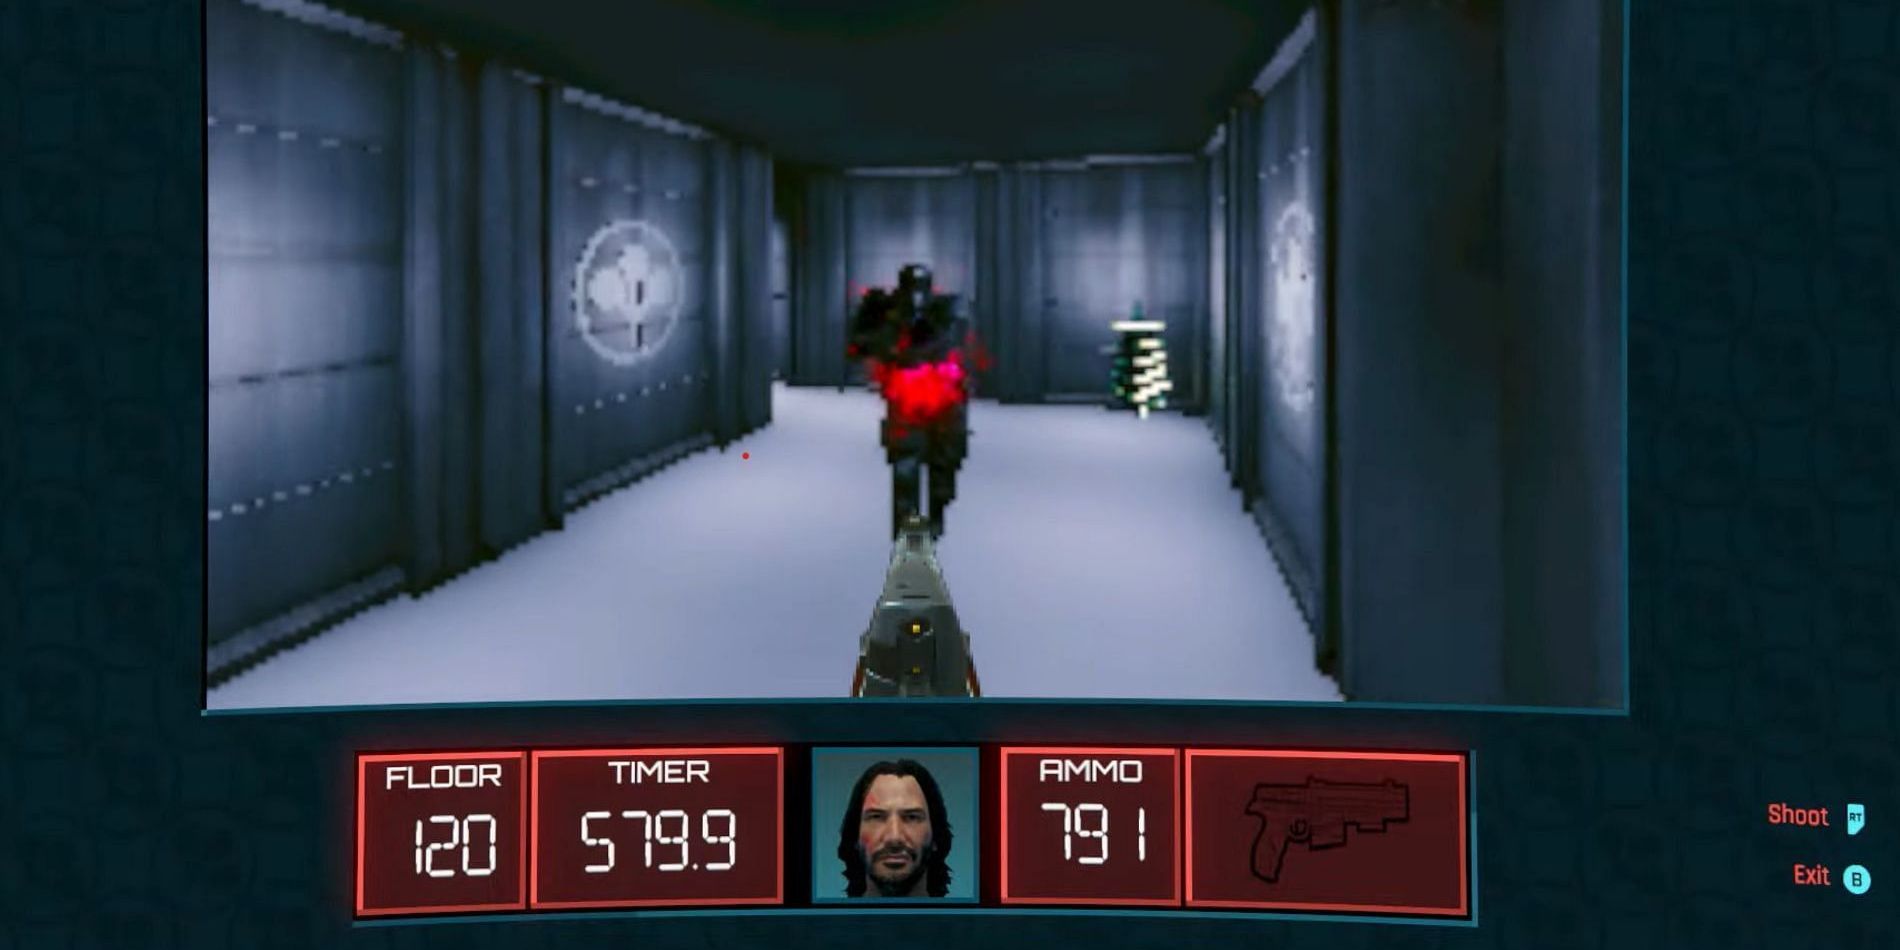 The player fires a gun at an Arasaka soldier in the retro 3D shooter minigame Arasaka Tower 3D, in a screenshot from Cyberpunk 2077. At the bottom of the screen, the current floor, timer, ammo, and weapon can be seen, along with a portrait of a smiling Johnny Silverhand.